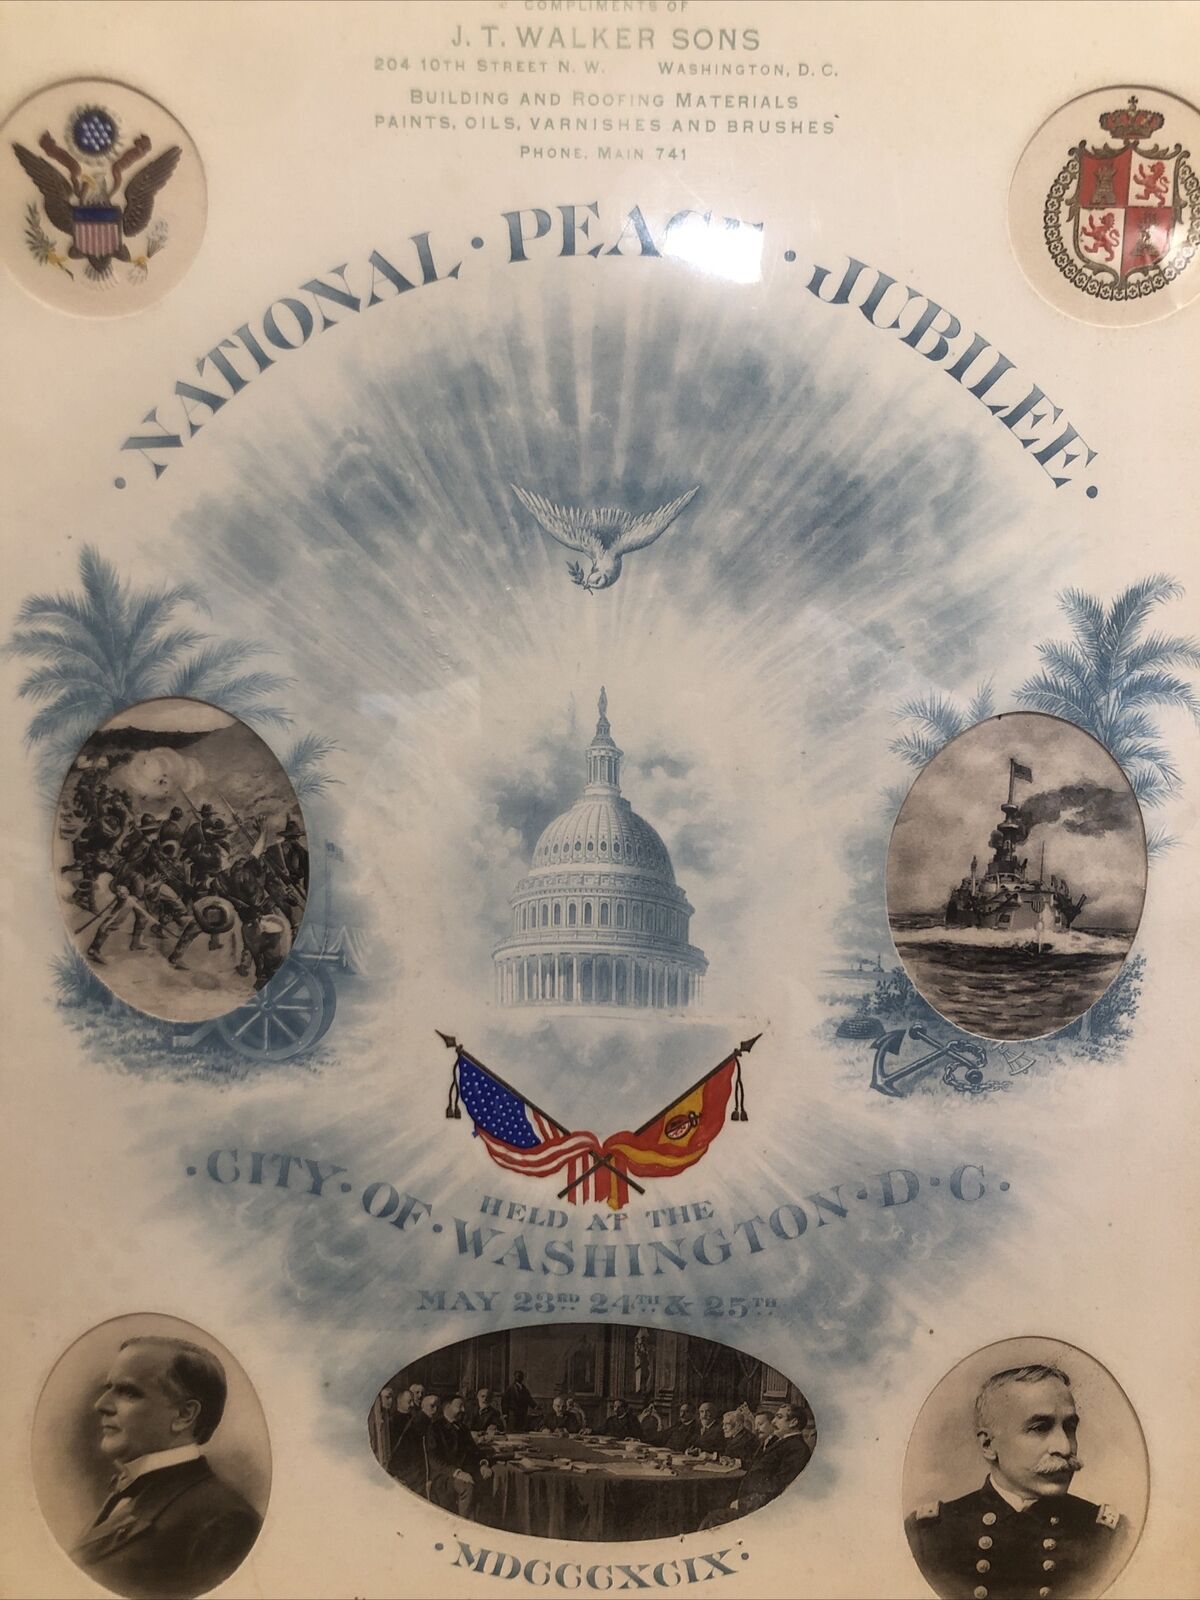 National peace jubilee 1899 Washington DC May 23 24th and 25th poster